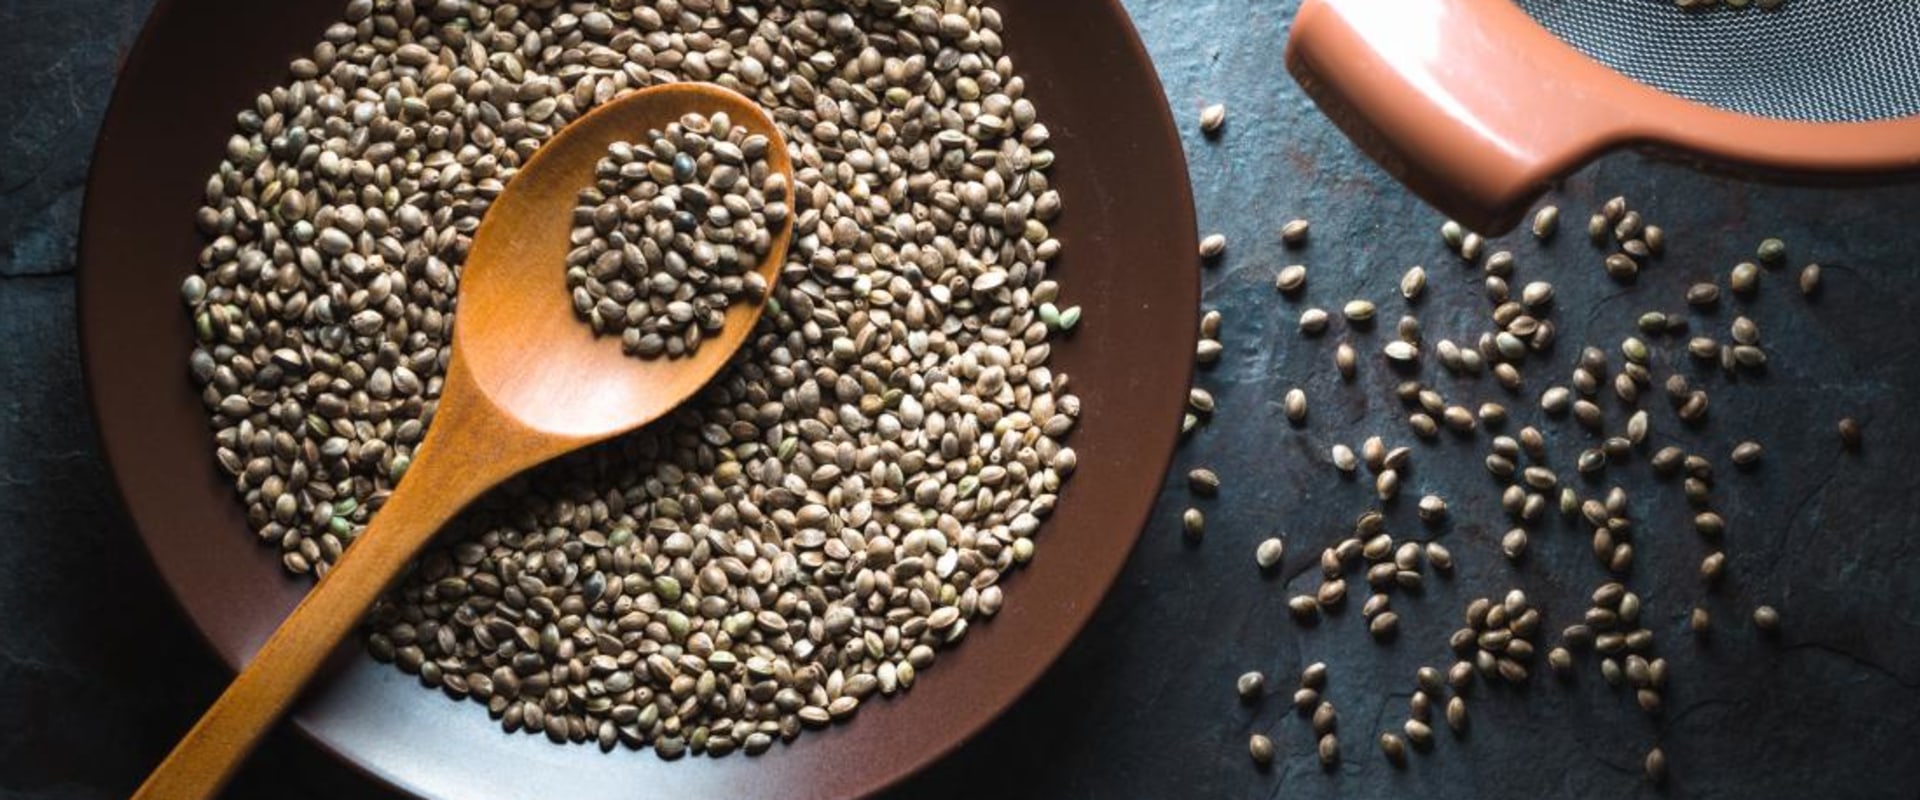 What Are Hemp Seeds and What Are Their Benefits?